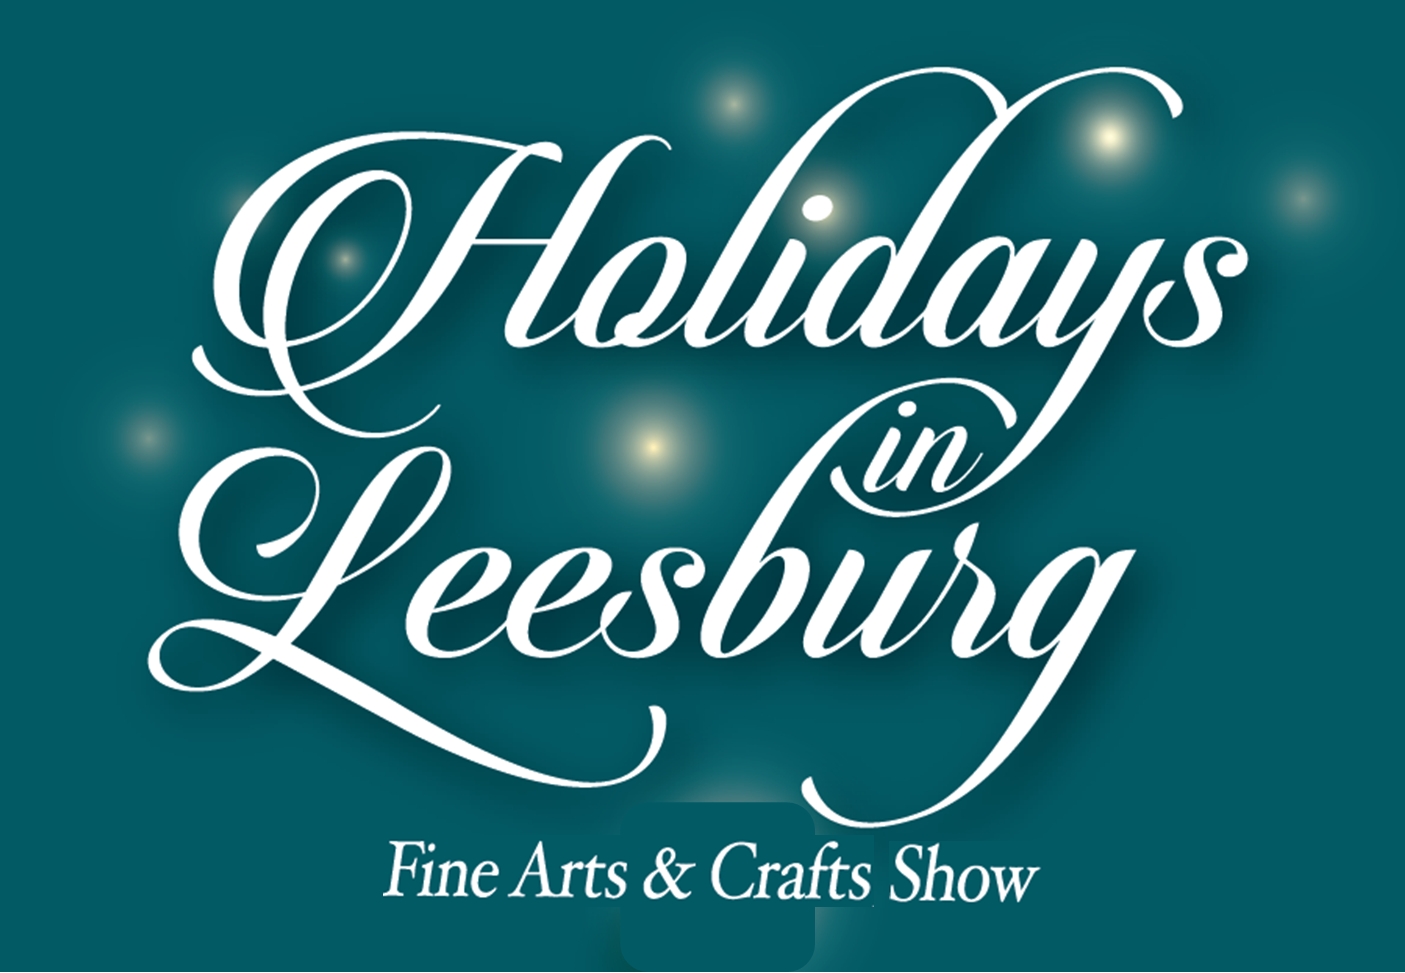 Holidays in Leesburg Fine Arts & Crafts Show